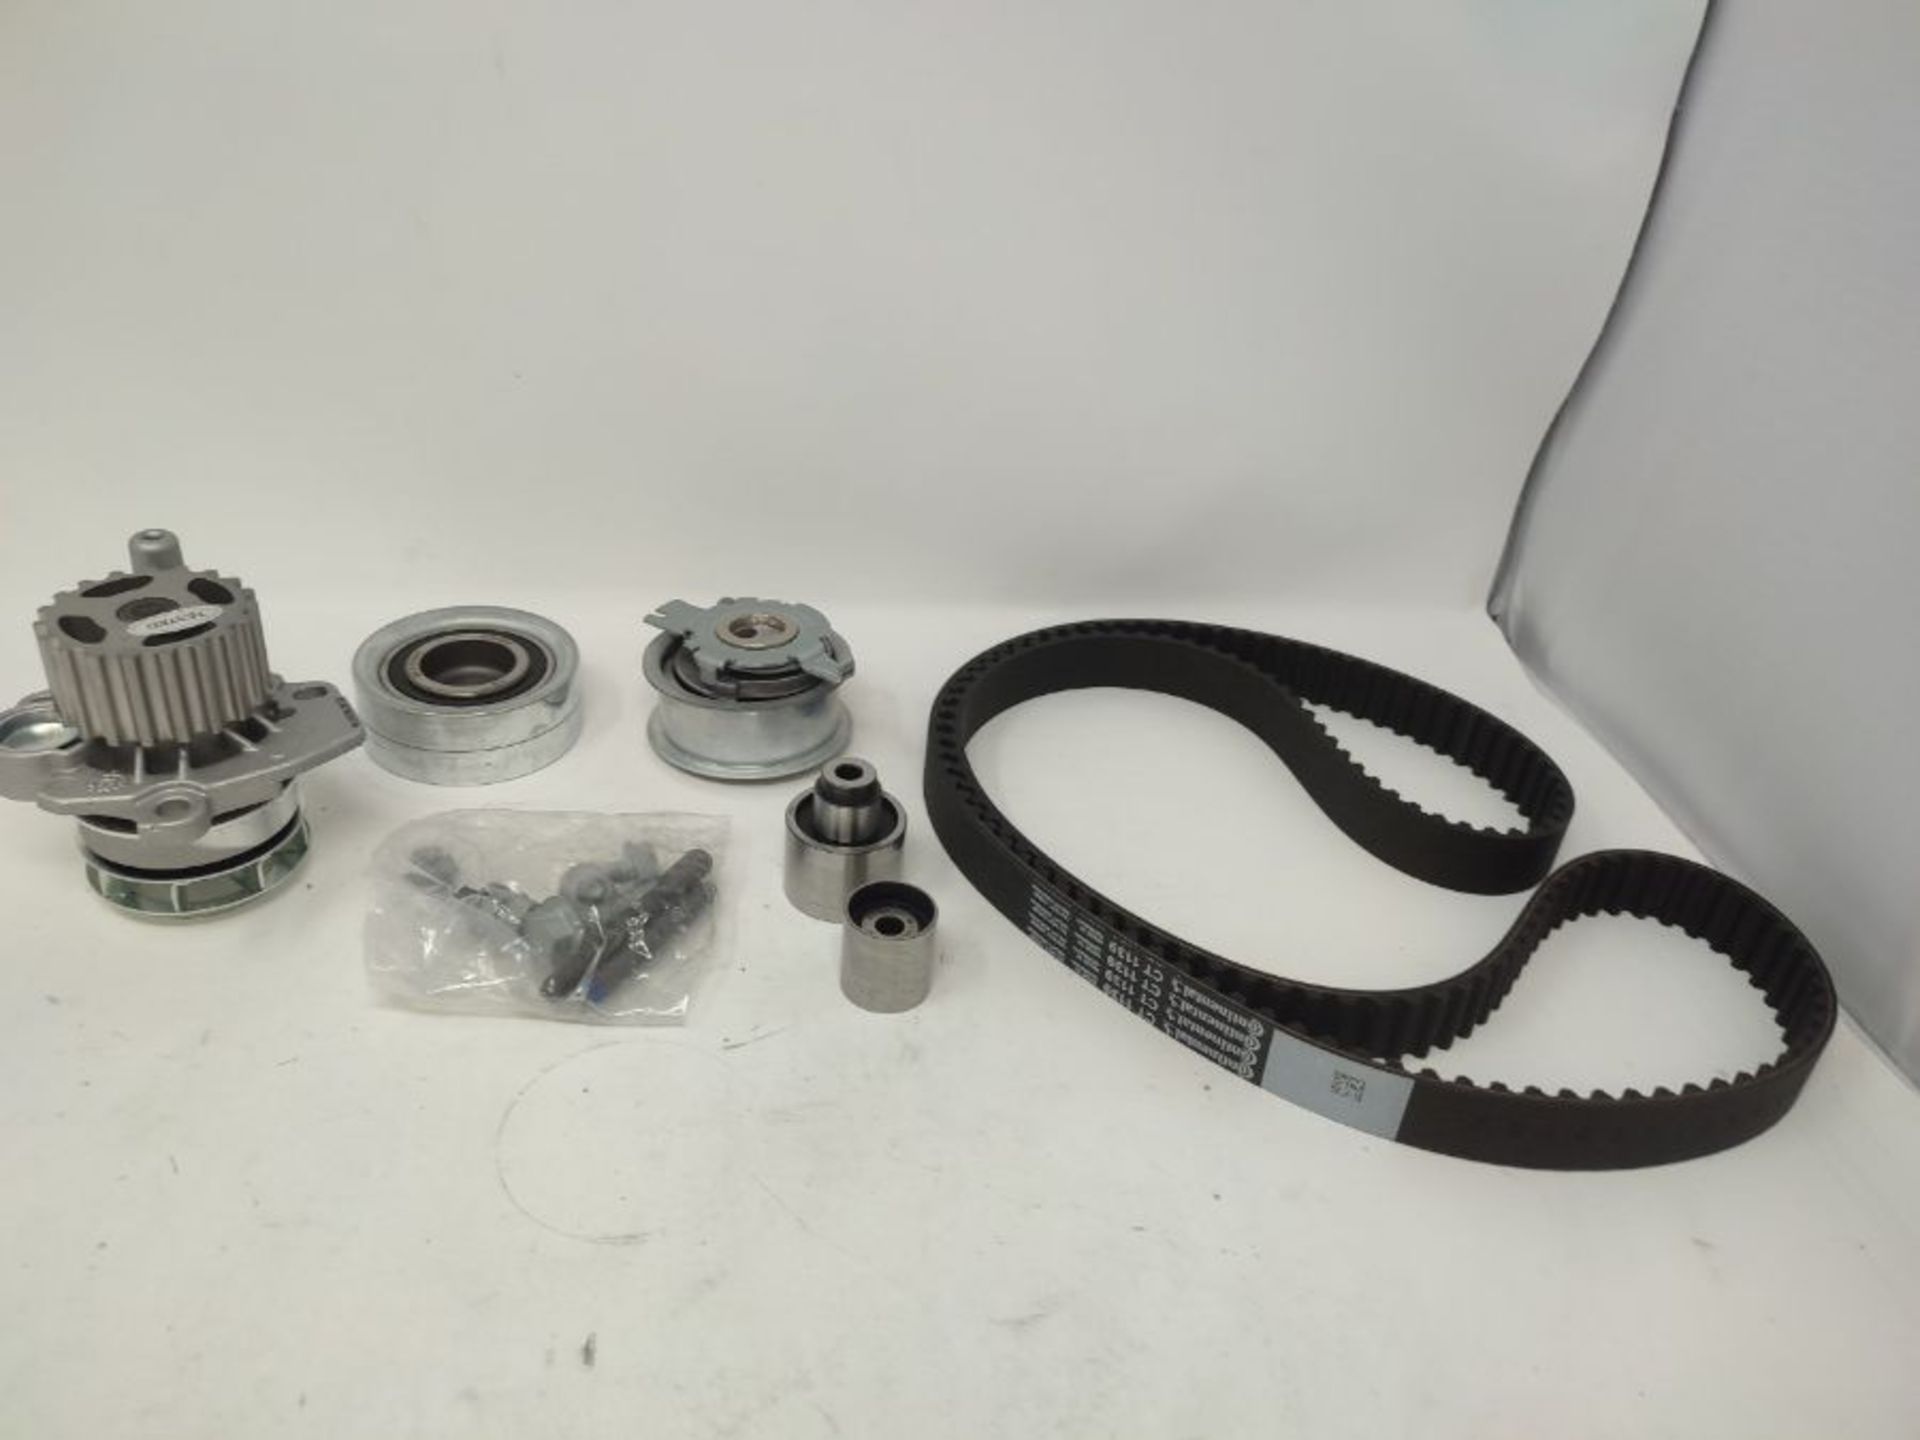 RRP £135.00 1 x Original Contitech Water Pump Timing Belt Kit Set with Tensioner Pulley and Guide - Image 3 of 3